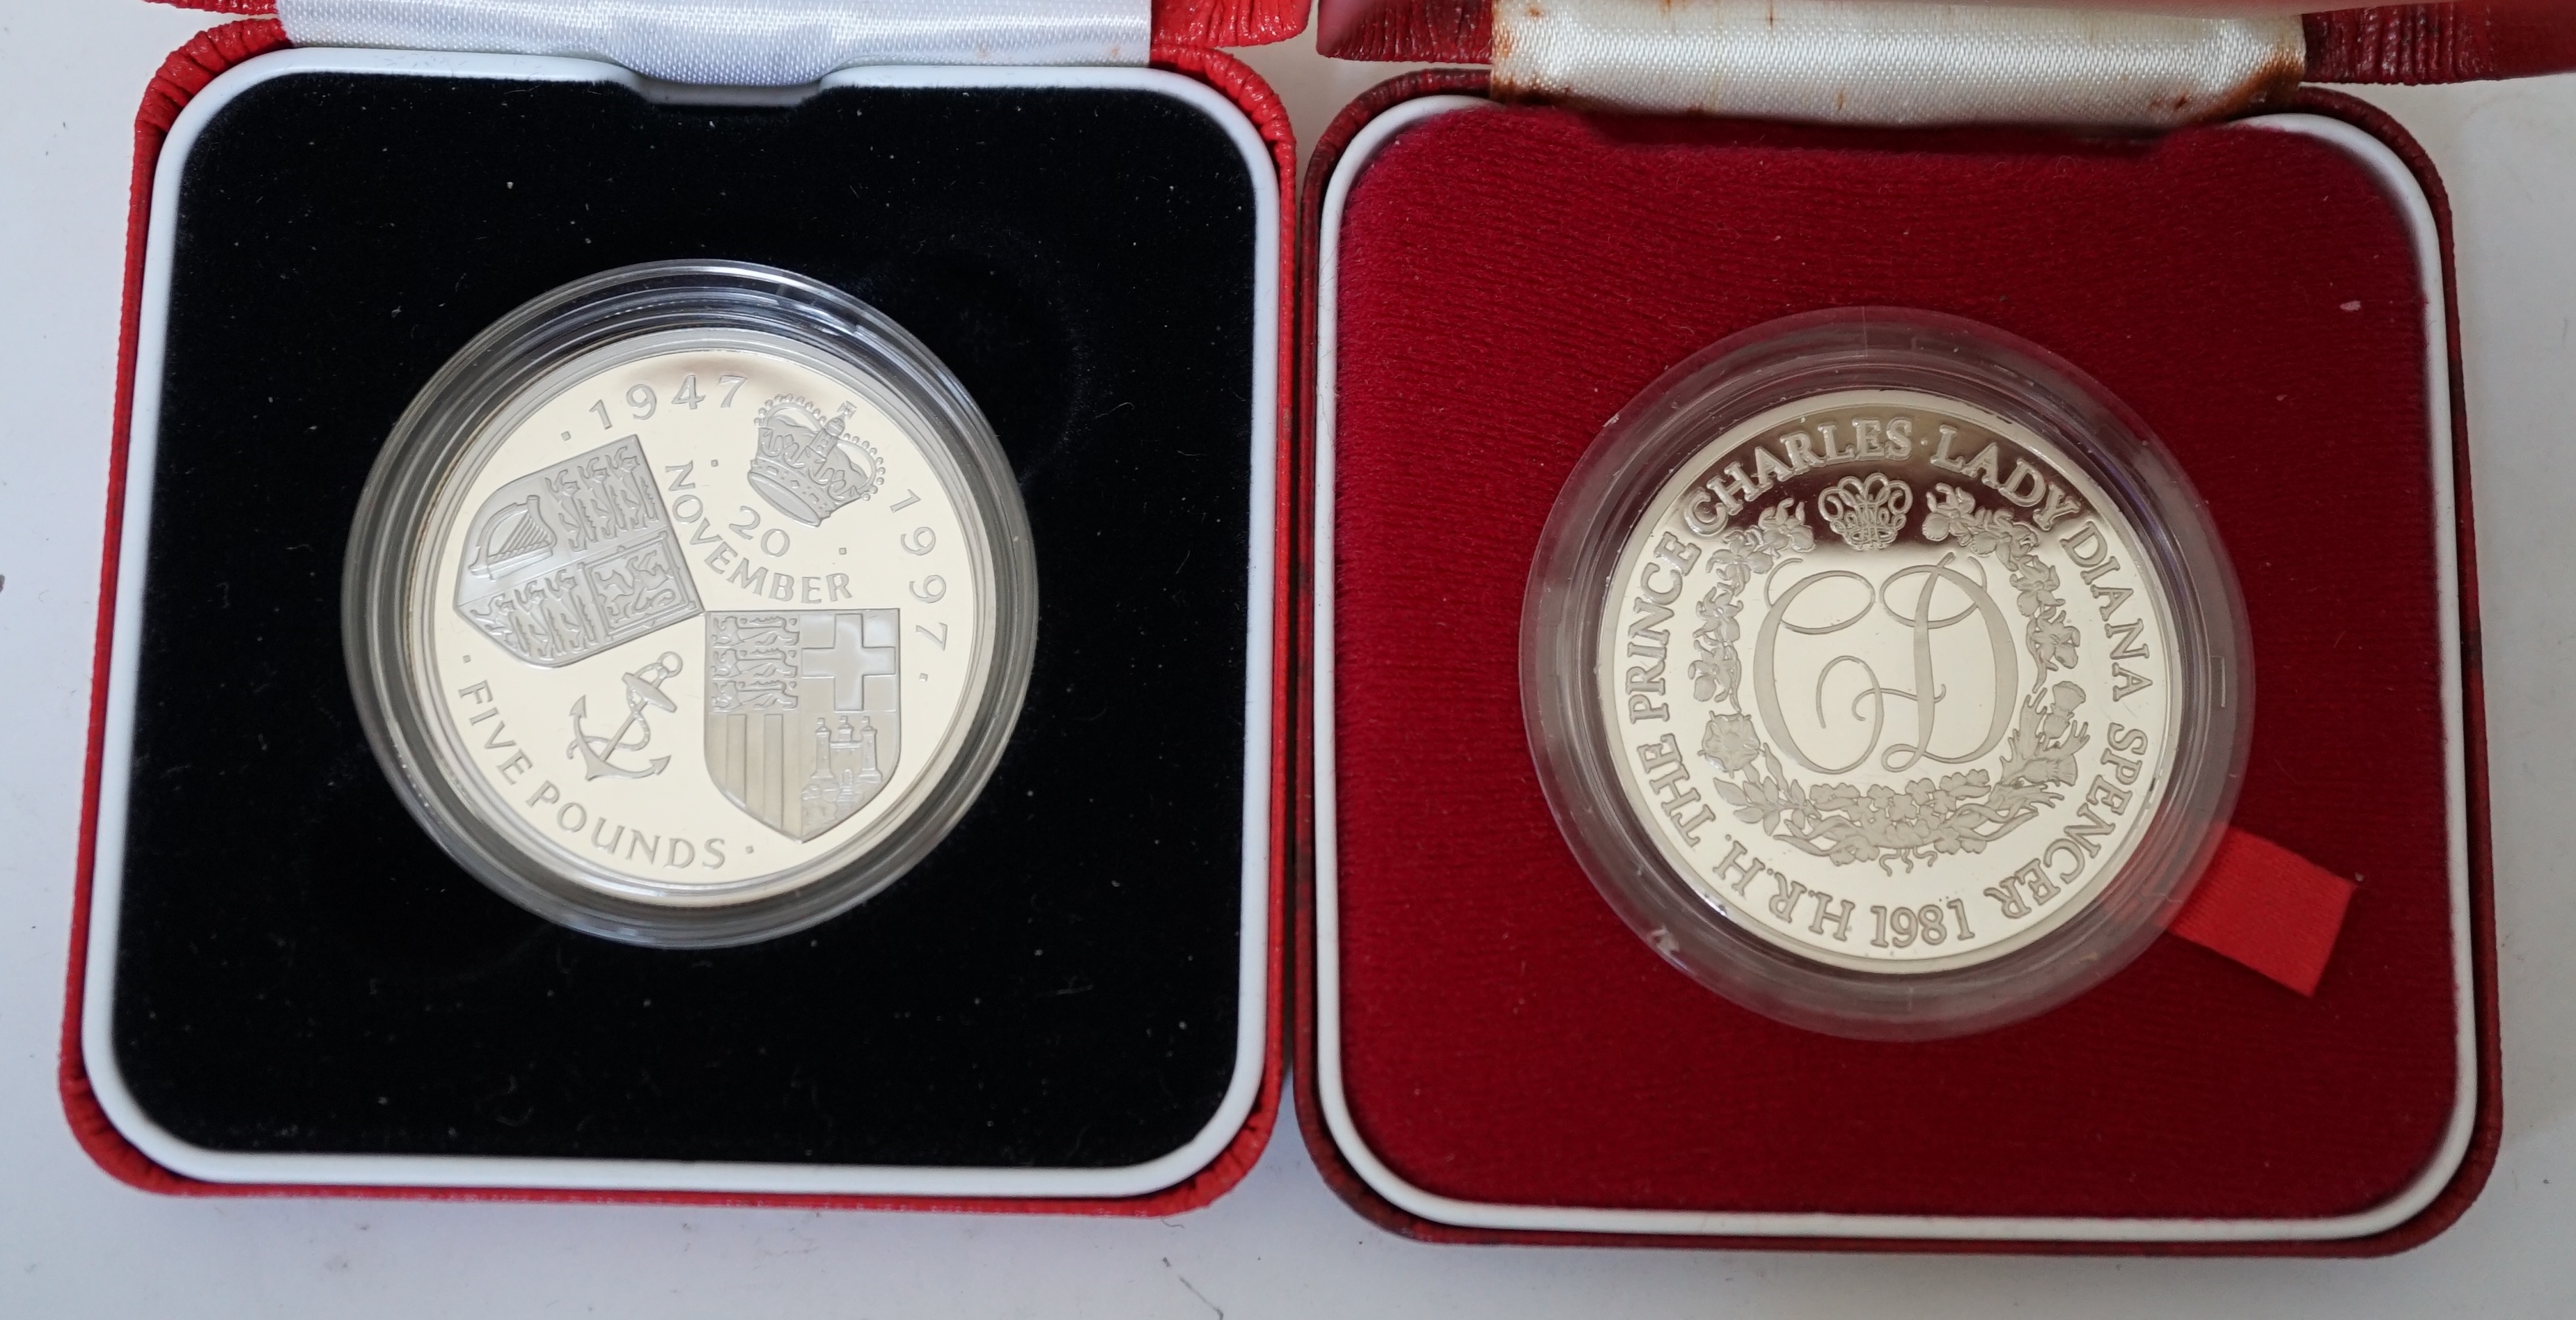 British and World commemorative coins and medals, issued by Birmingham, Pobjoy and Franklin mints, including Charles and Lady Diana silver medals, two Republic of Malta decimal proof sets for 1980, Queen Mother sterling